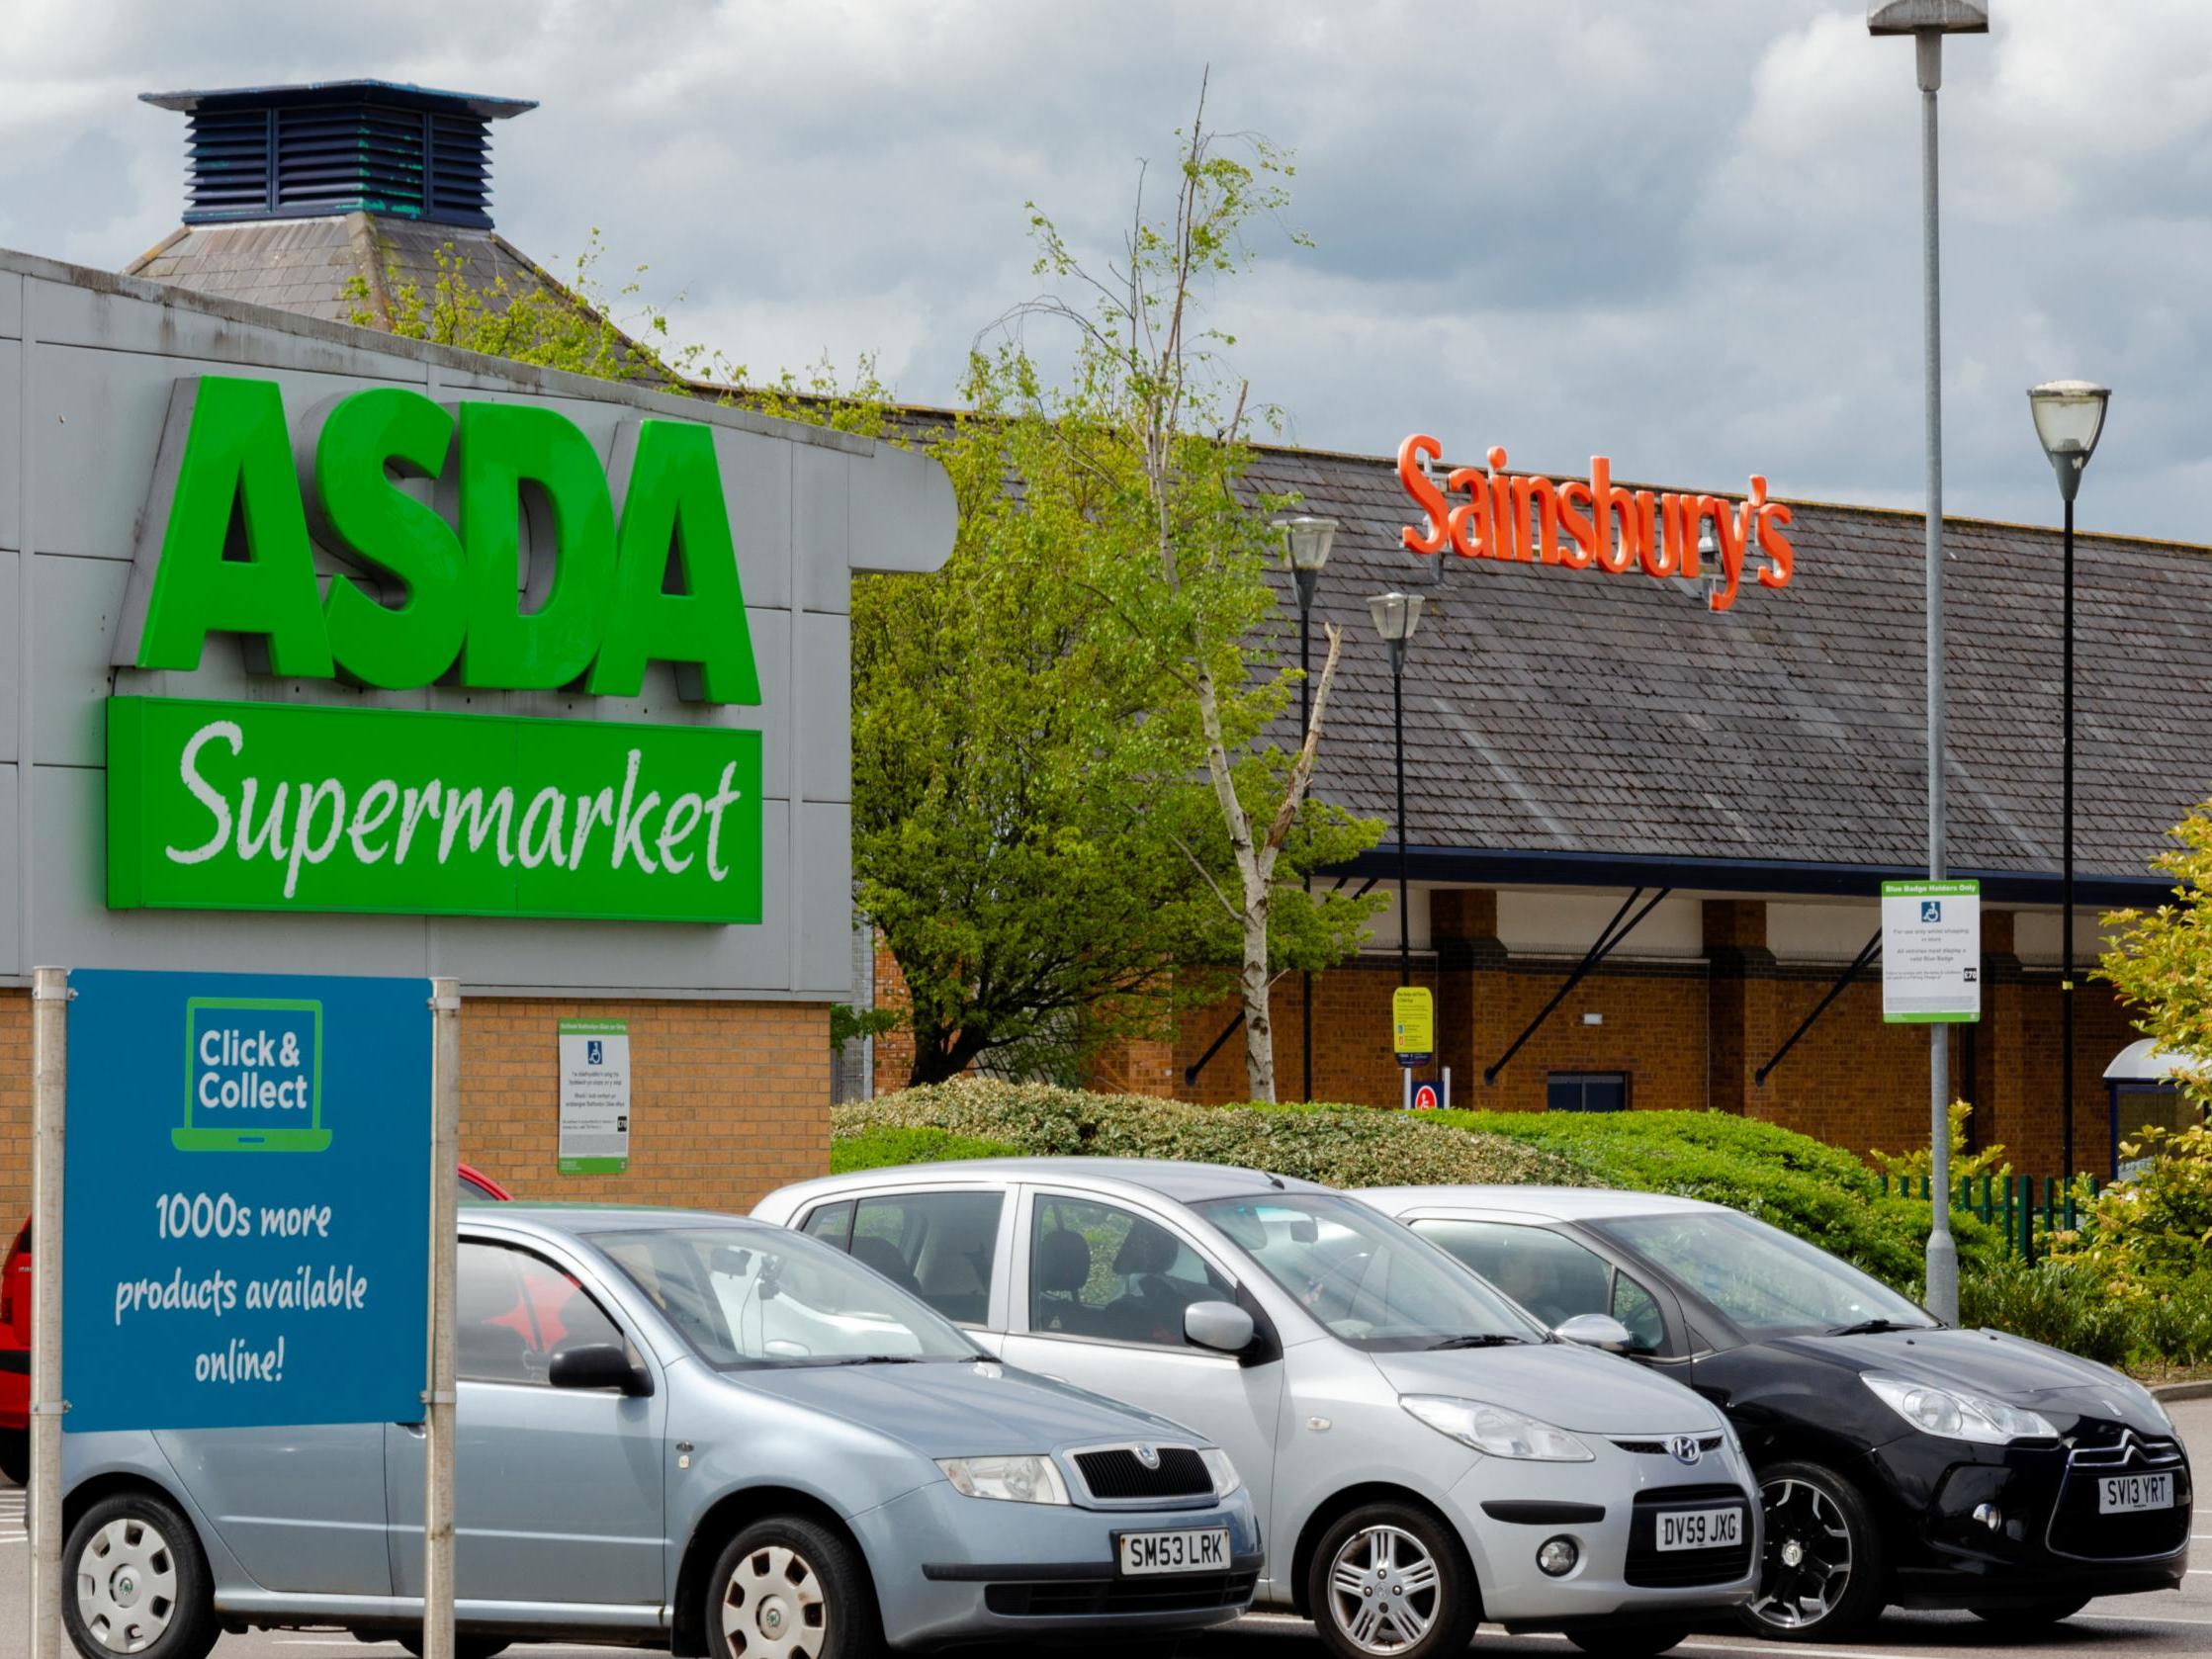 Asda shop floor staff, who are mostly women, are paid less than depot staff, who are mostly men. Workers argue that this amounts to gender discrimination